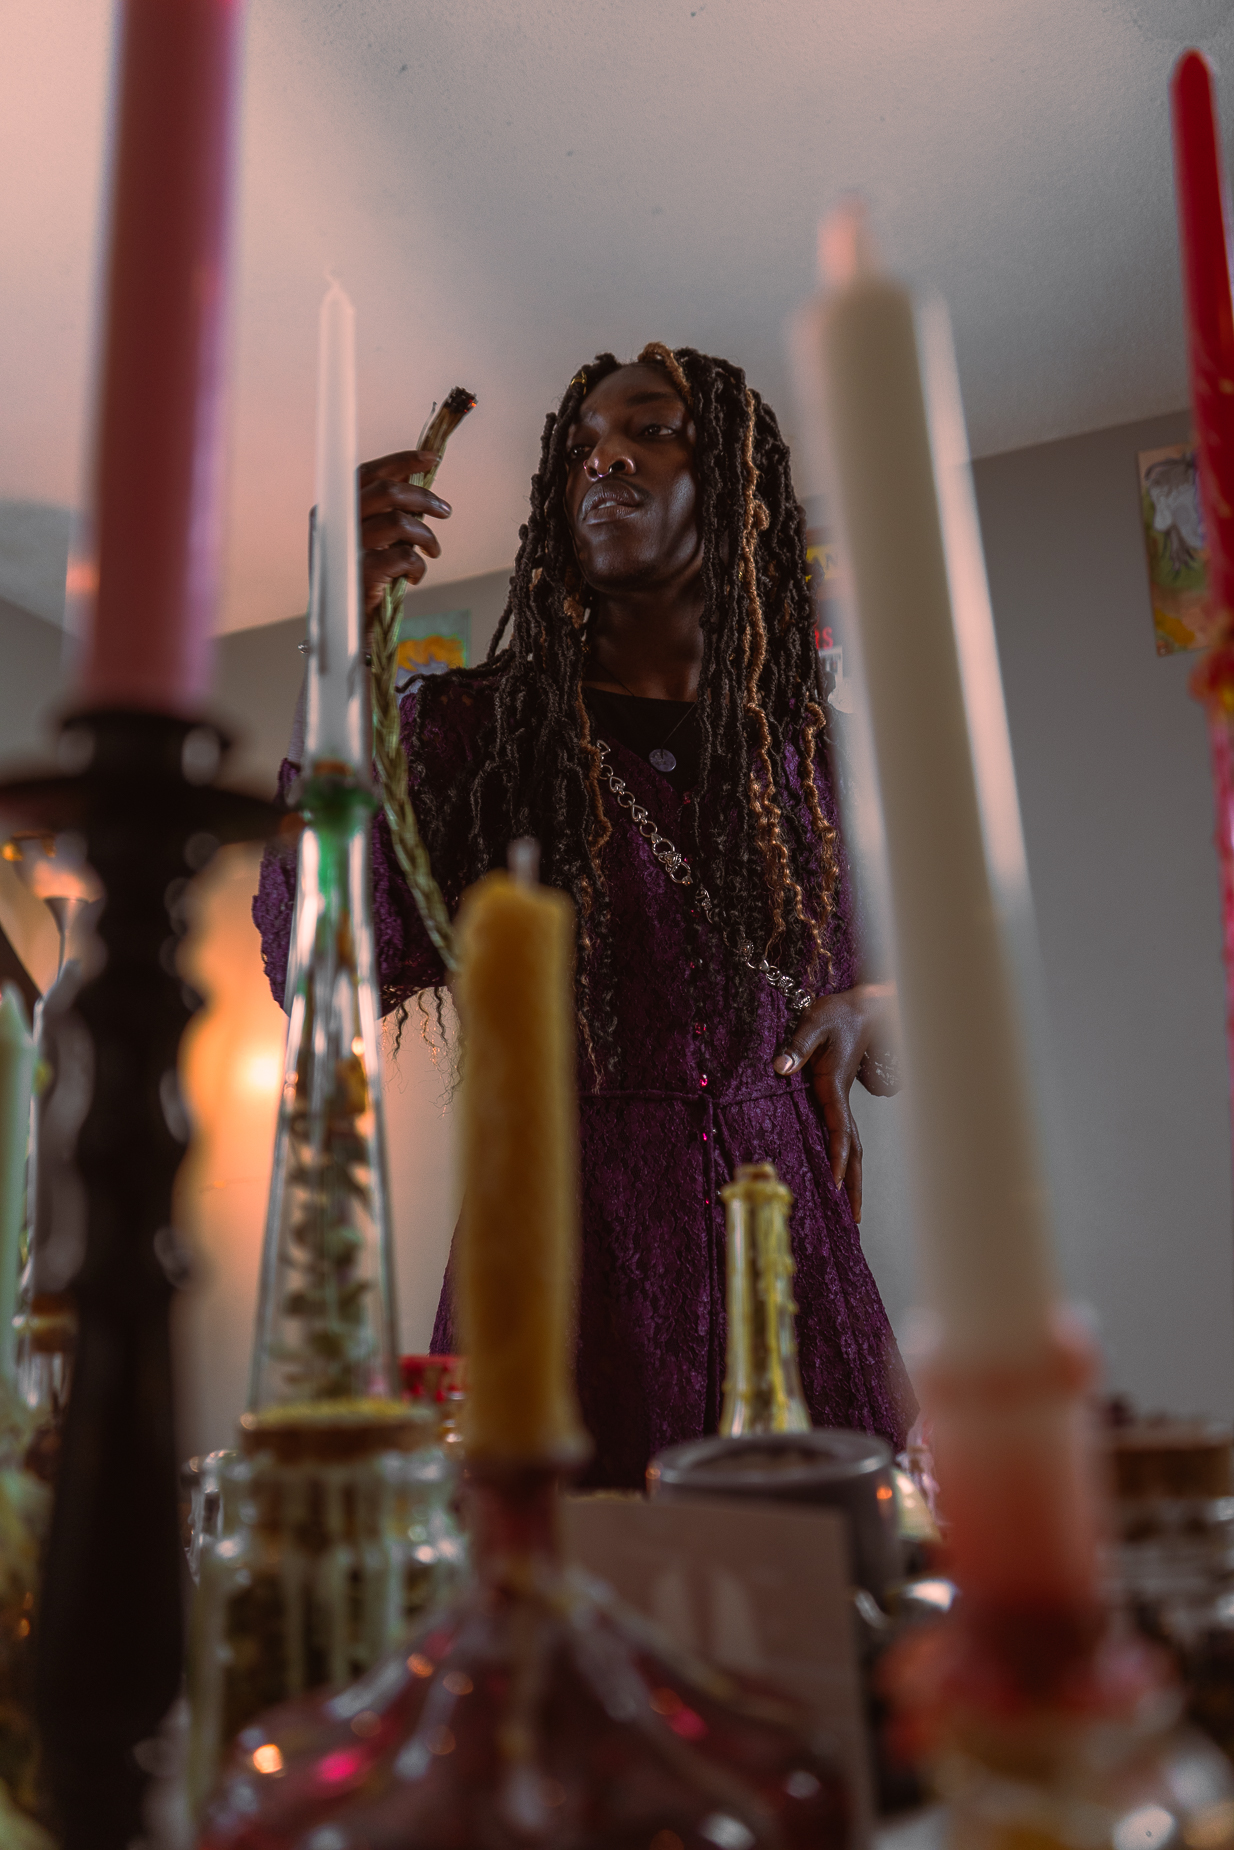 Picture of Viktor Andi-Joi Gee, a young black person with dreads, in their workspace, surrounded by candles, herbs and holding a smudge stick